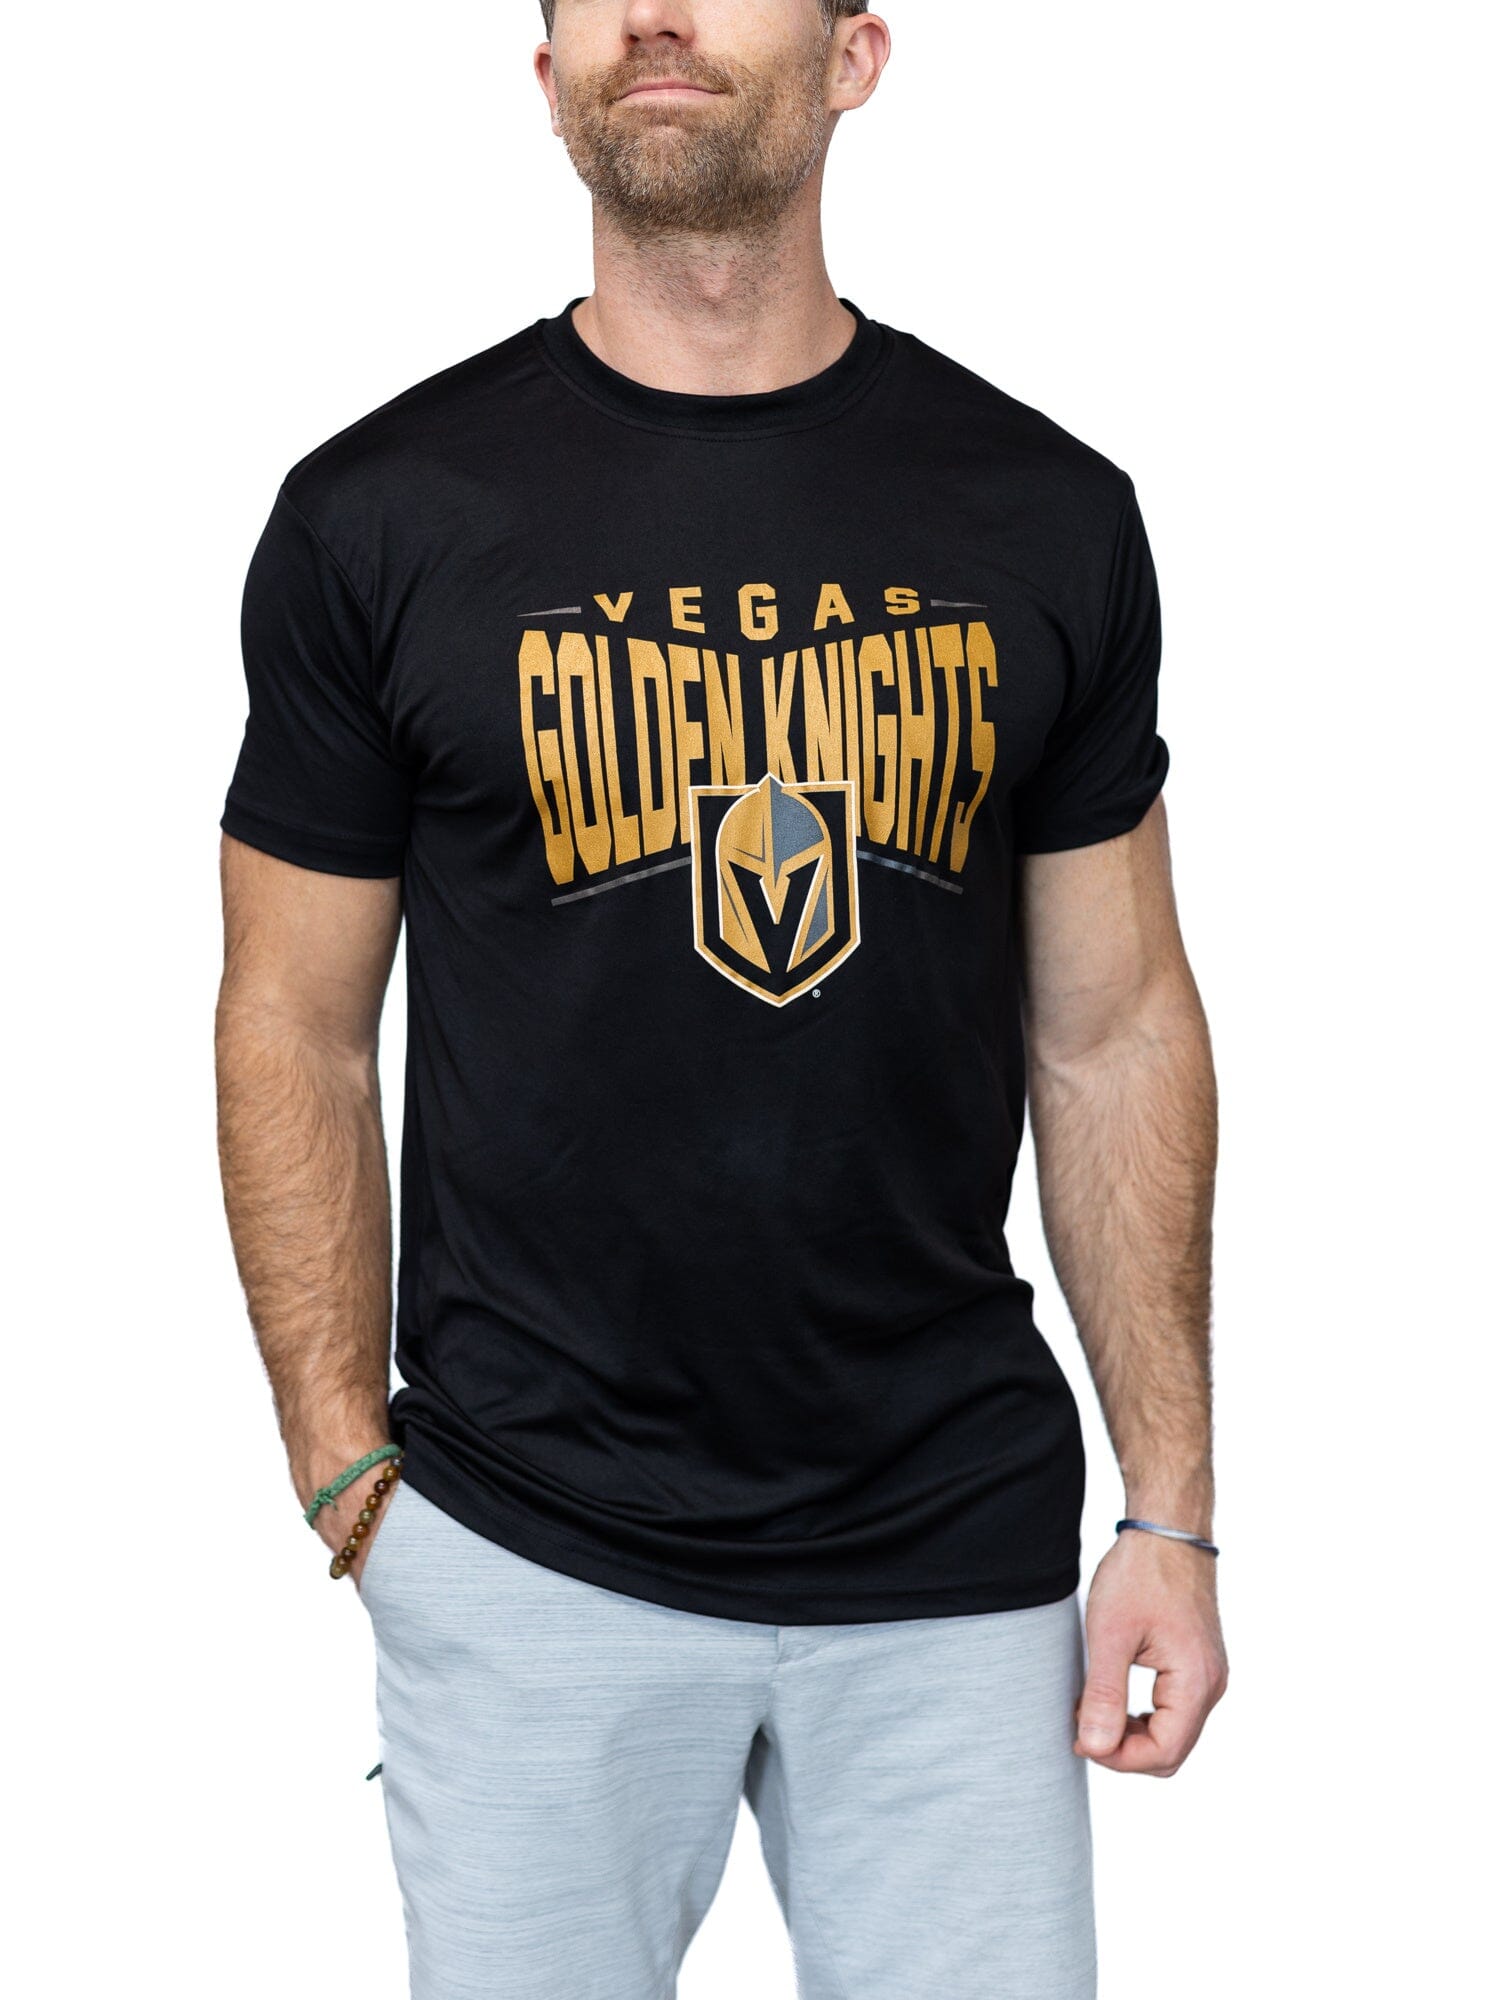 Too Many Men Stanley Cup Champs 2022 T-Shirt t-shirt by To-Tee